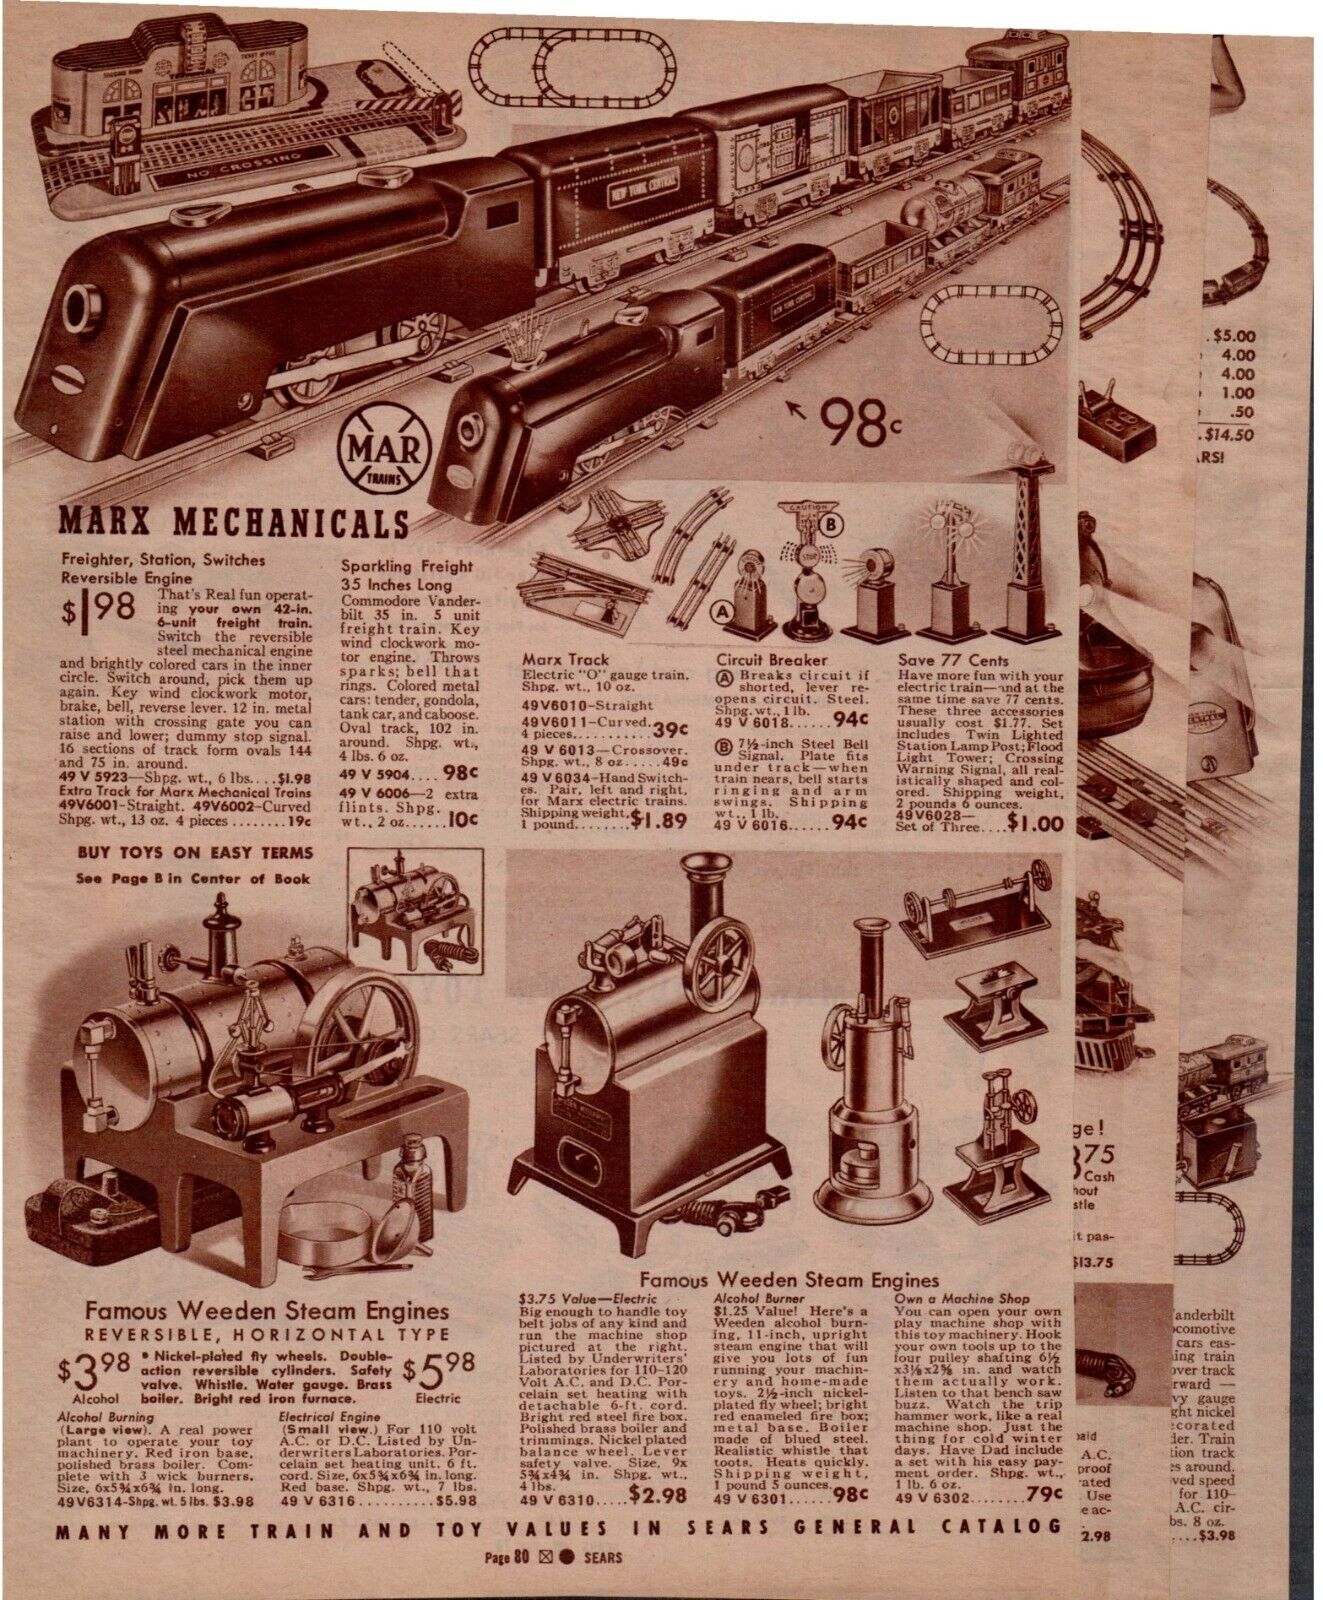 Late 1930's Sears Catalog Page #79-84 Lionel and Marx Electric Train Set Toys